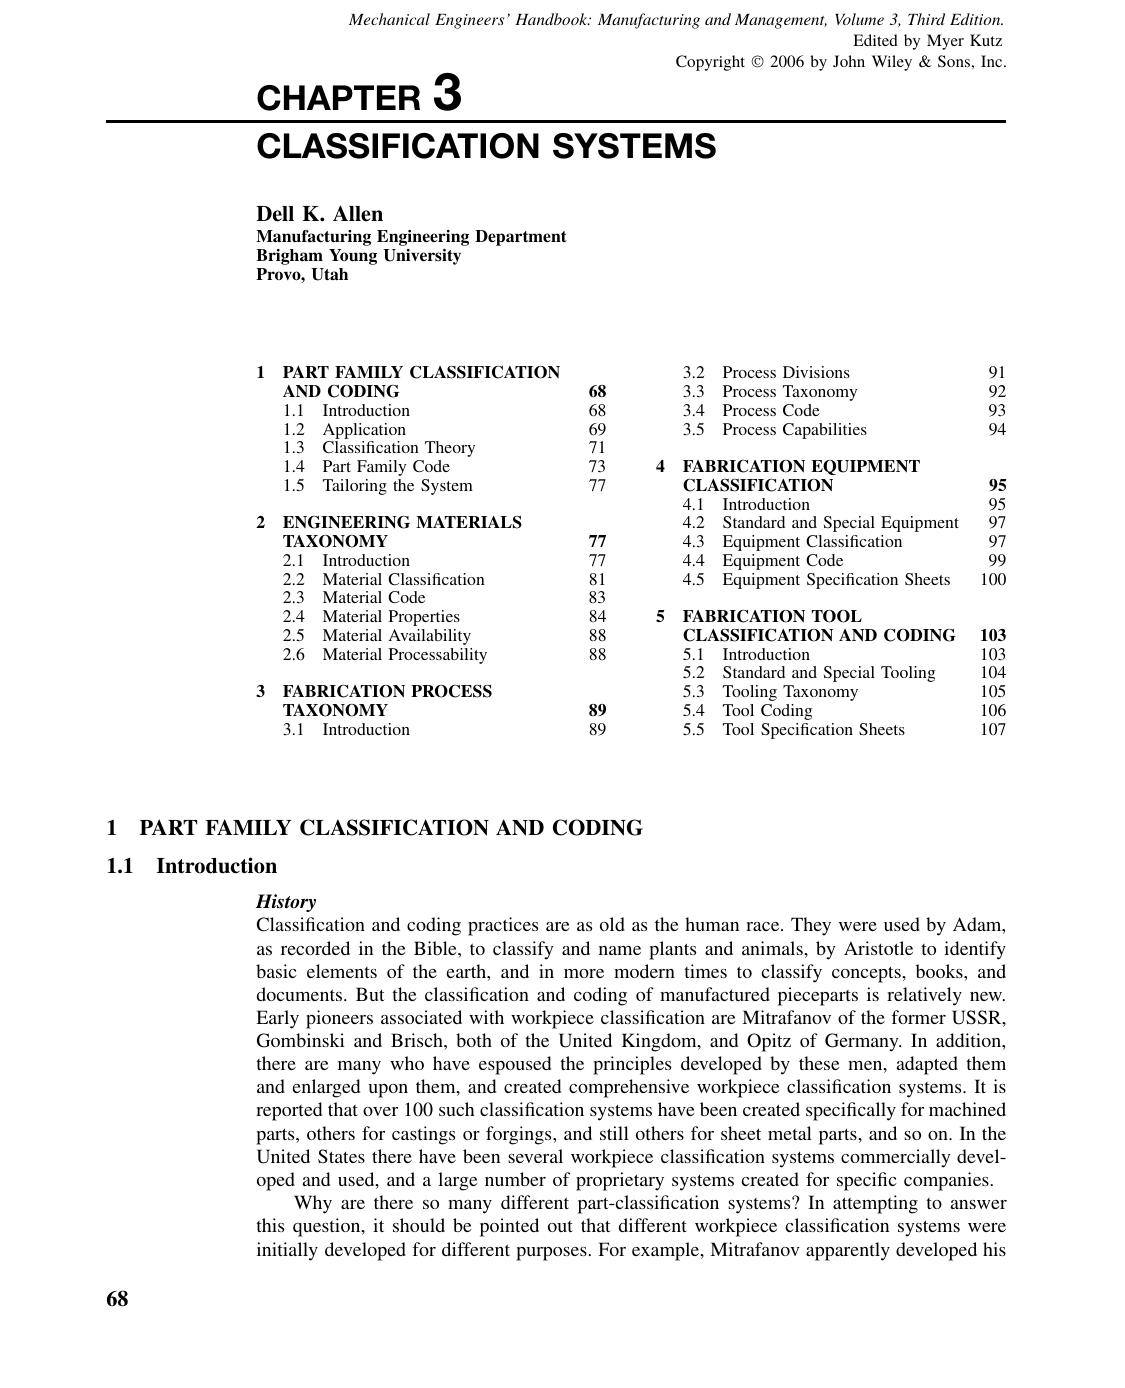 Classification Systems by penta